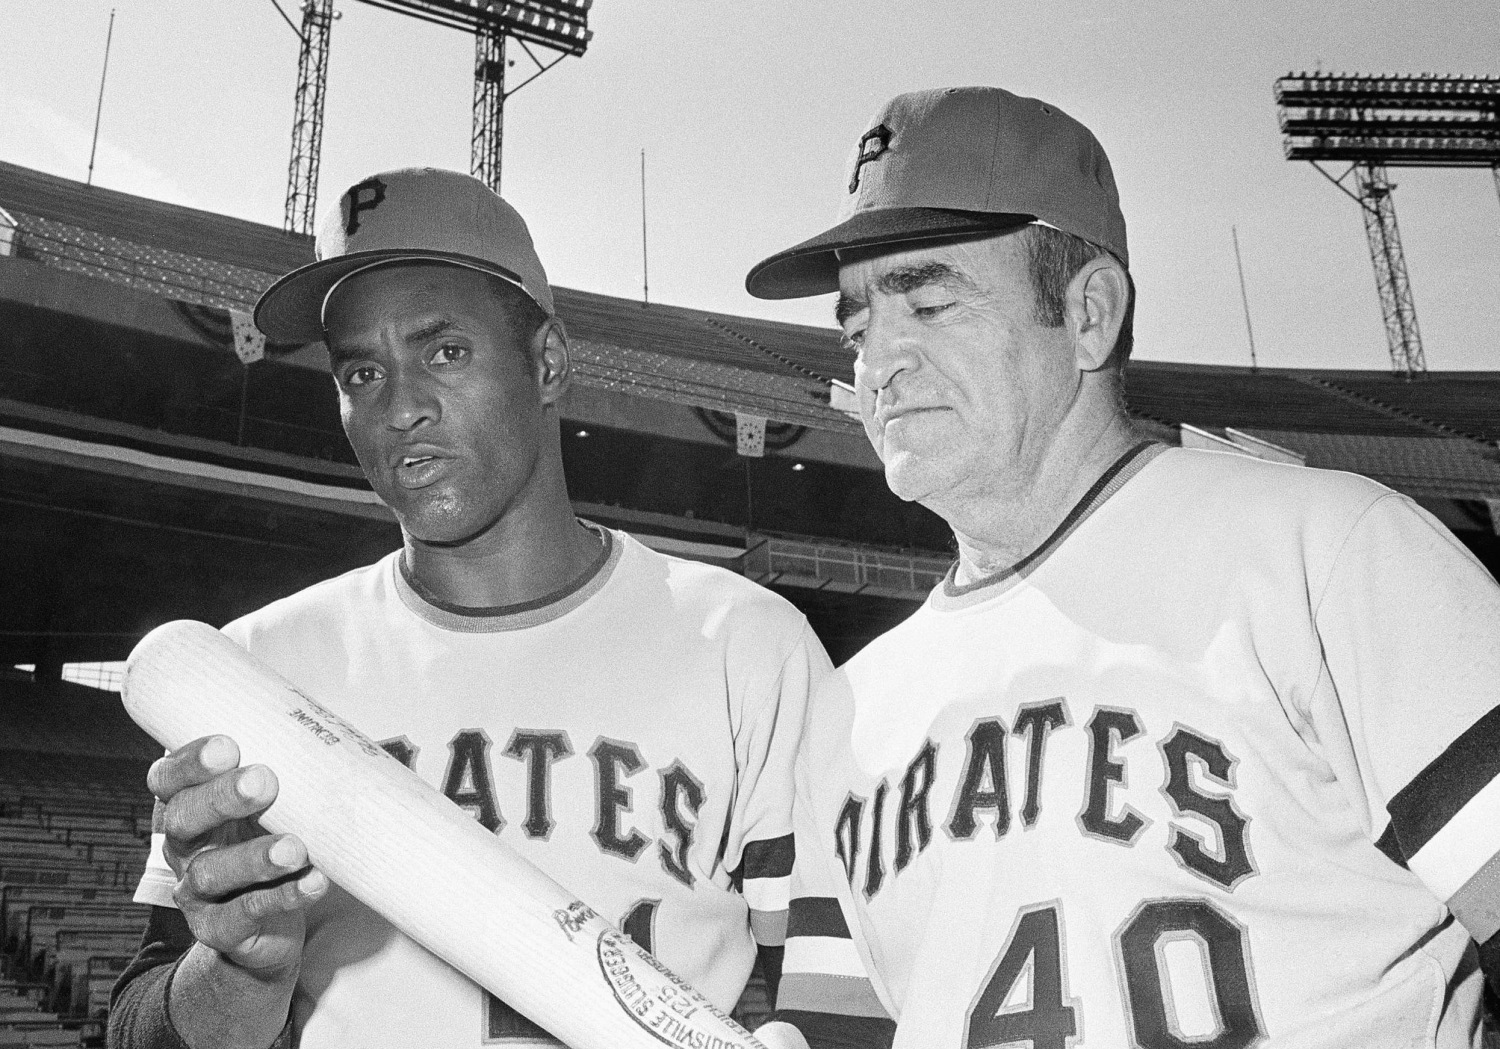 Across Pittsburgh, Pirates gather to honor Roberto Clemente